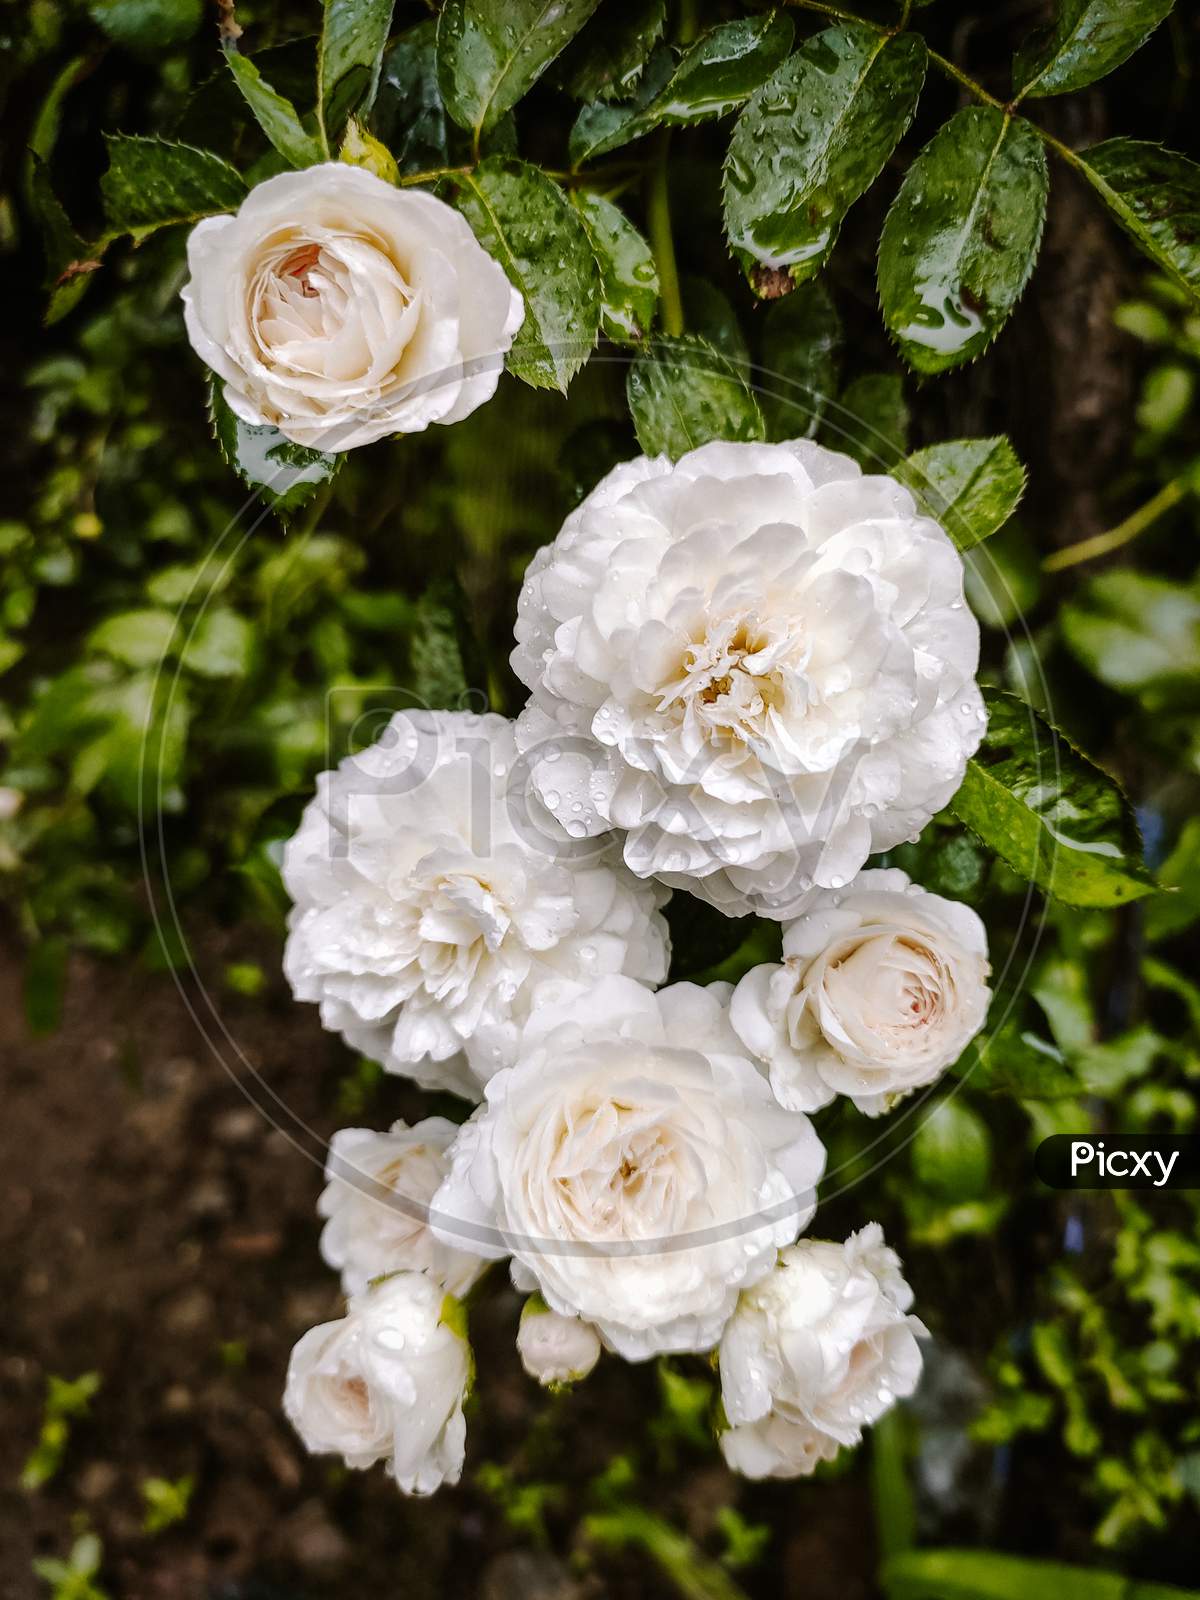 White roses in garden with green leaf